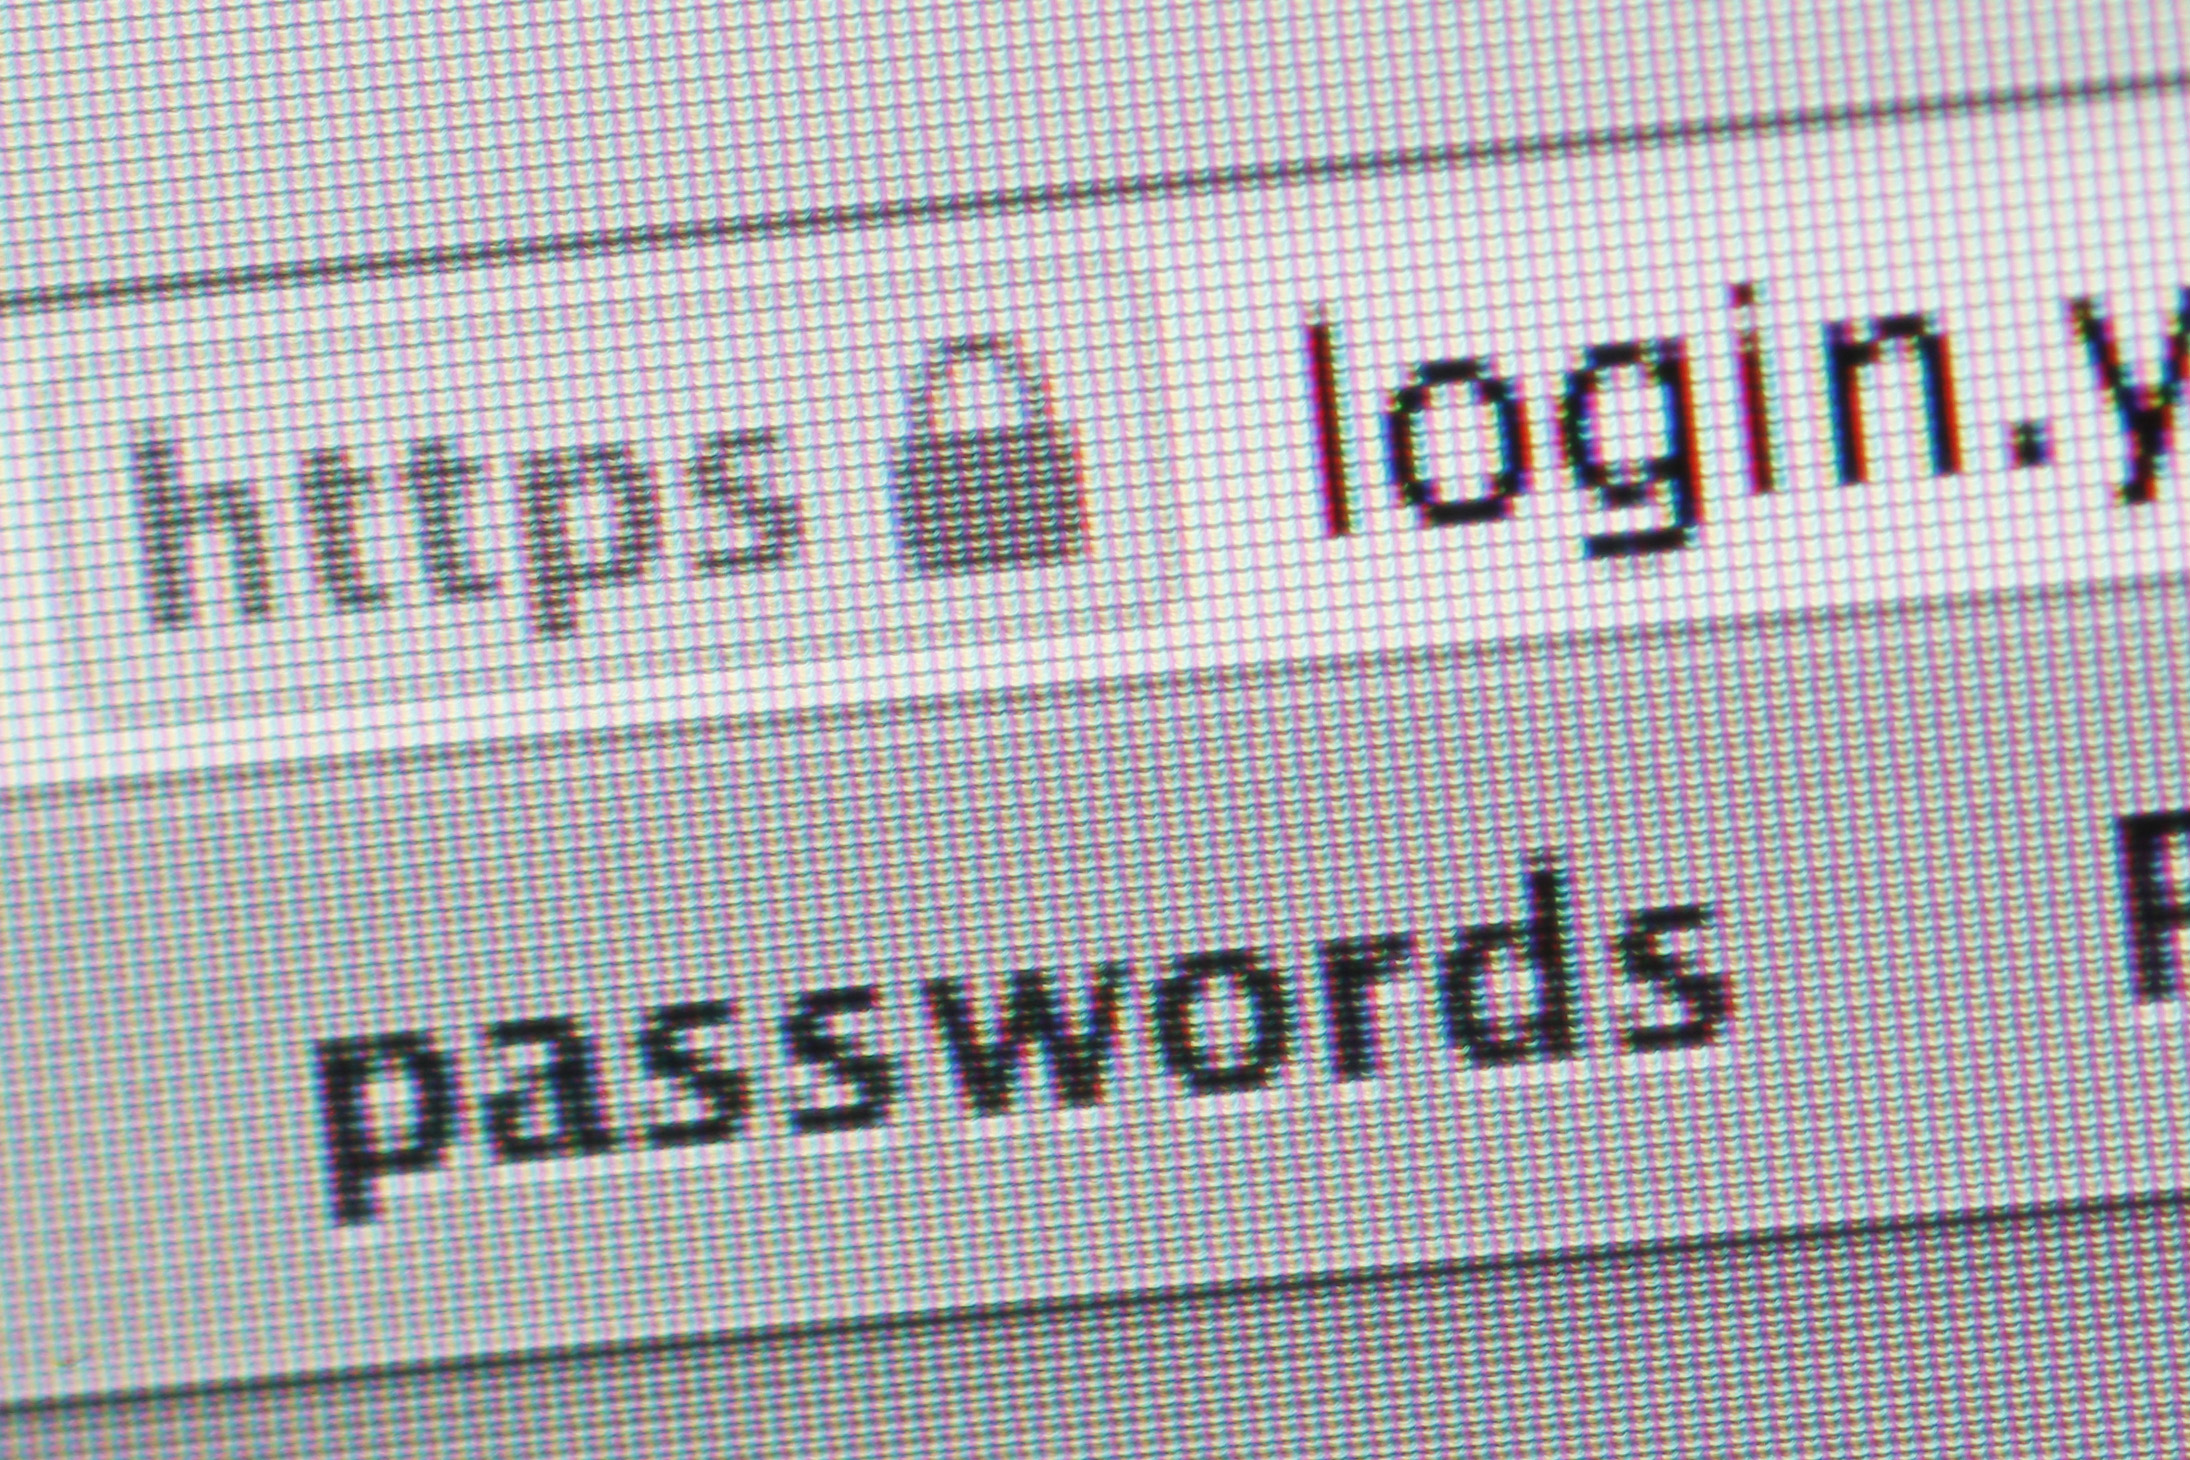 Symbol of a secure website, https, on a computer screen on August 08, 2014, in Berlin, Germany. (Thomas Trutschel&mdash;Photothek via Getty Images)